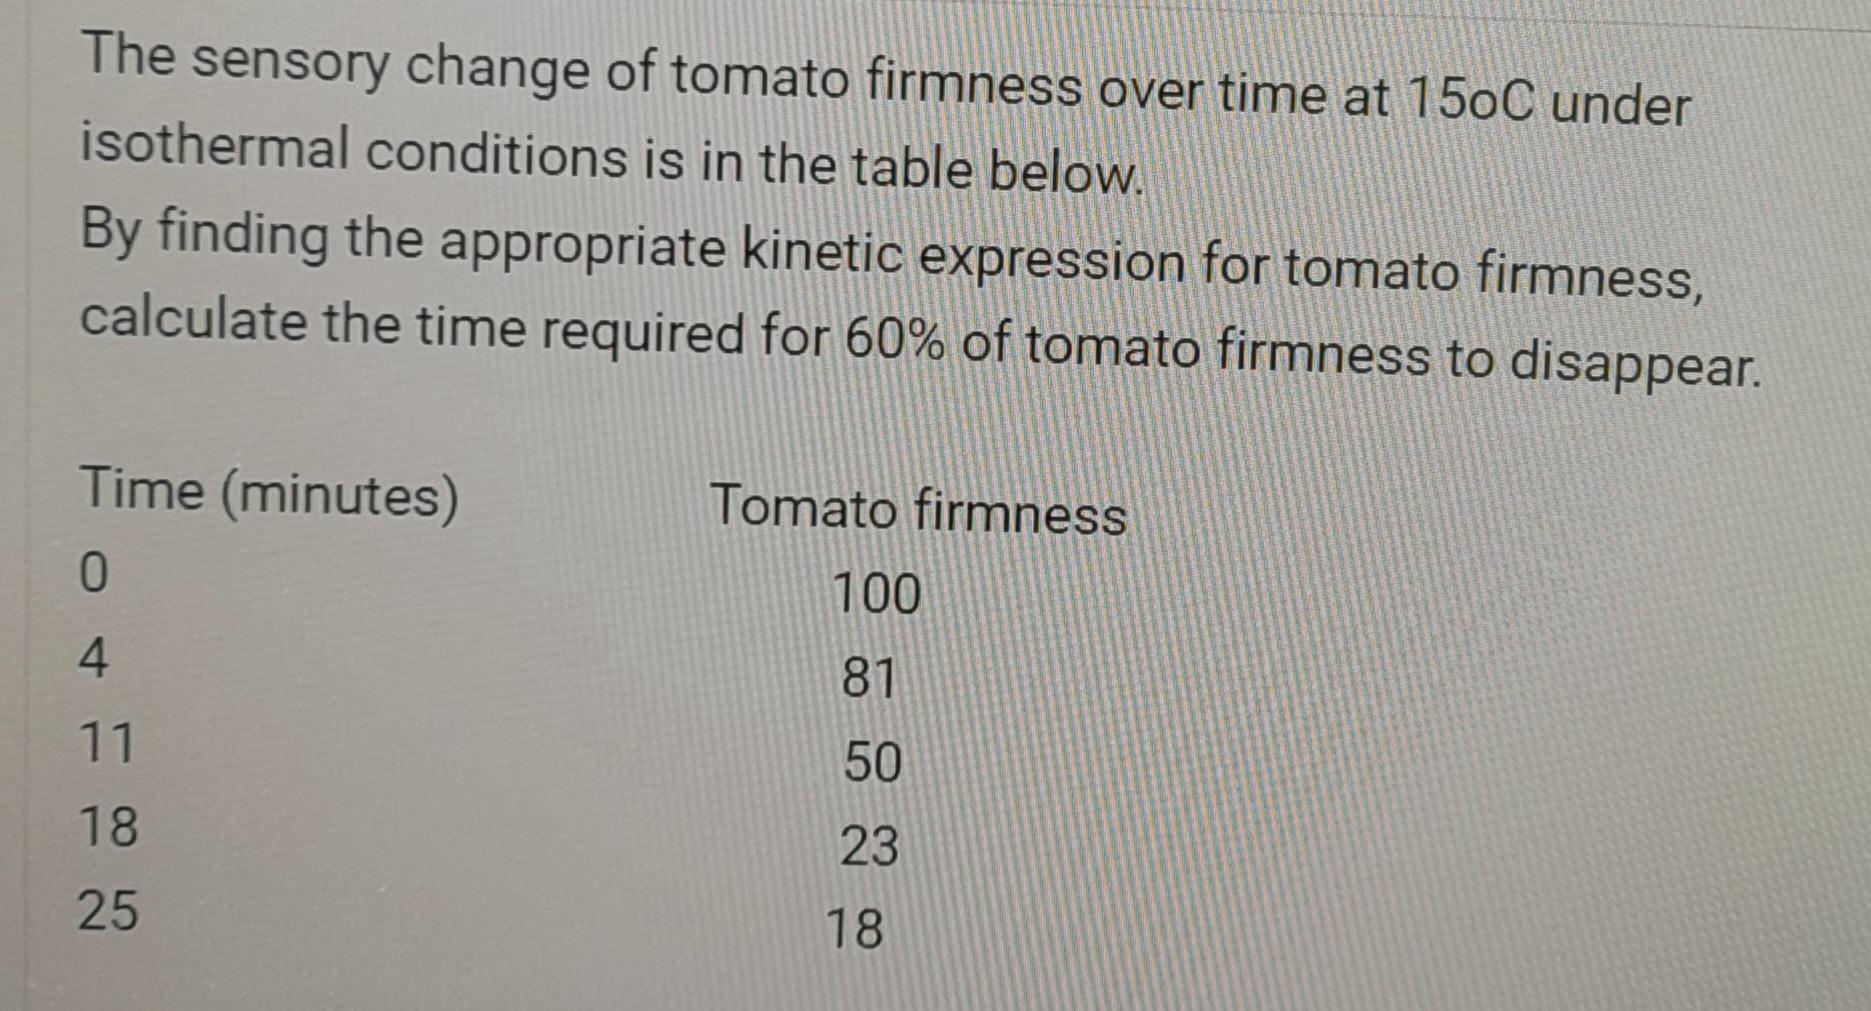 The sensory change of tomato firmness over time at 15oC under isothermal conditions is in the table below. By